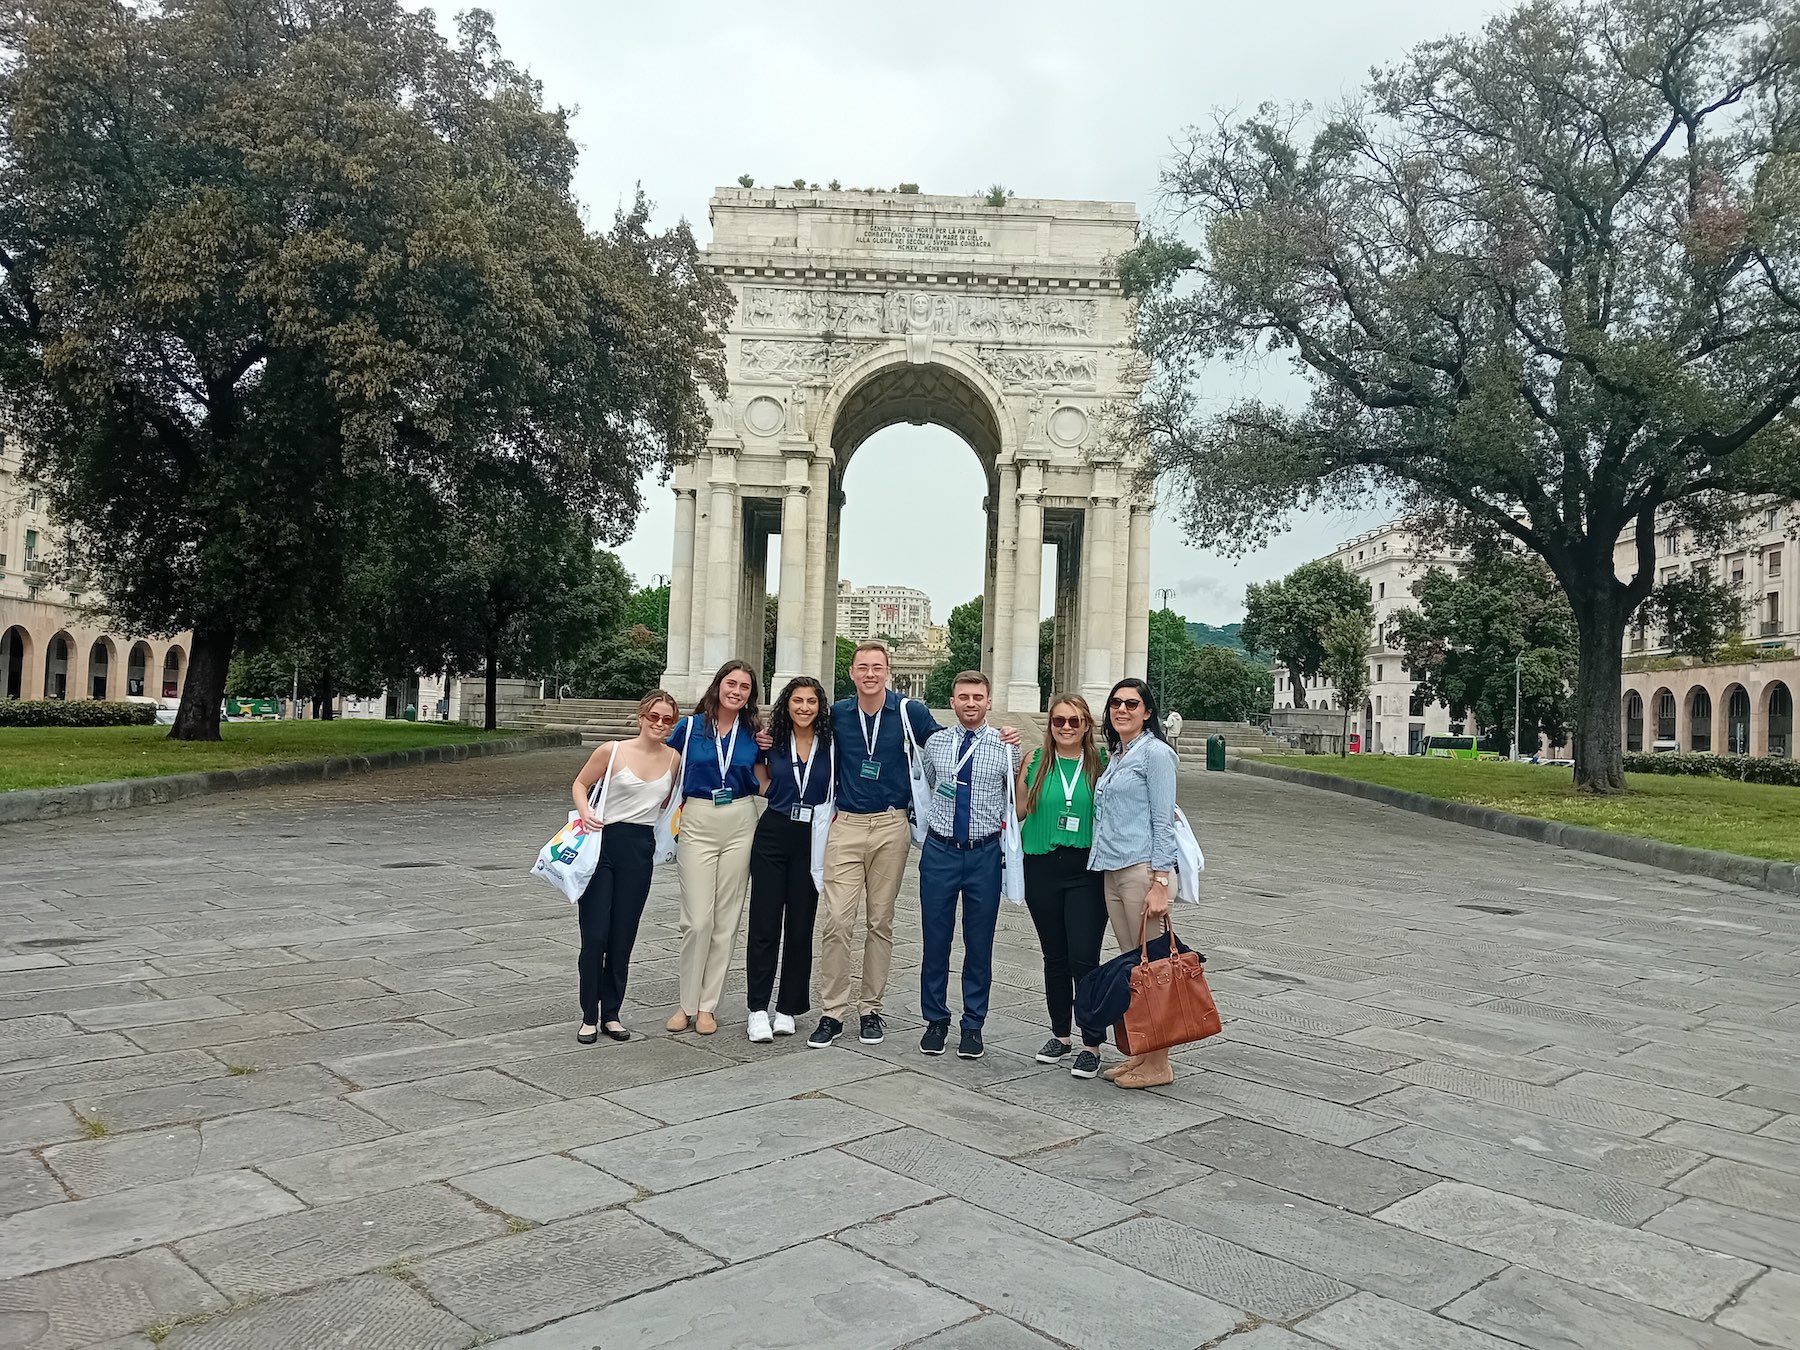 Tech student Sarah Beshara is shown third from left at the Arco della Vittoria in Genoa, Italy.